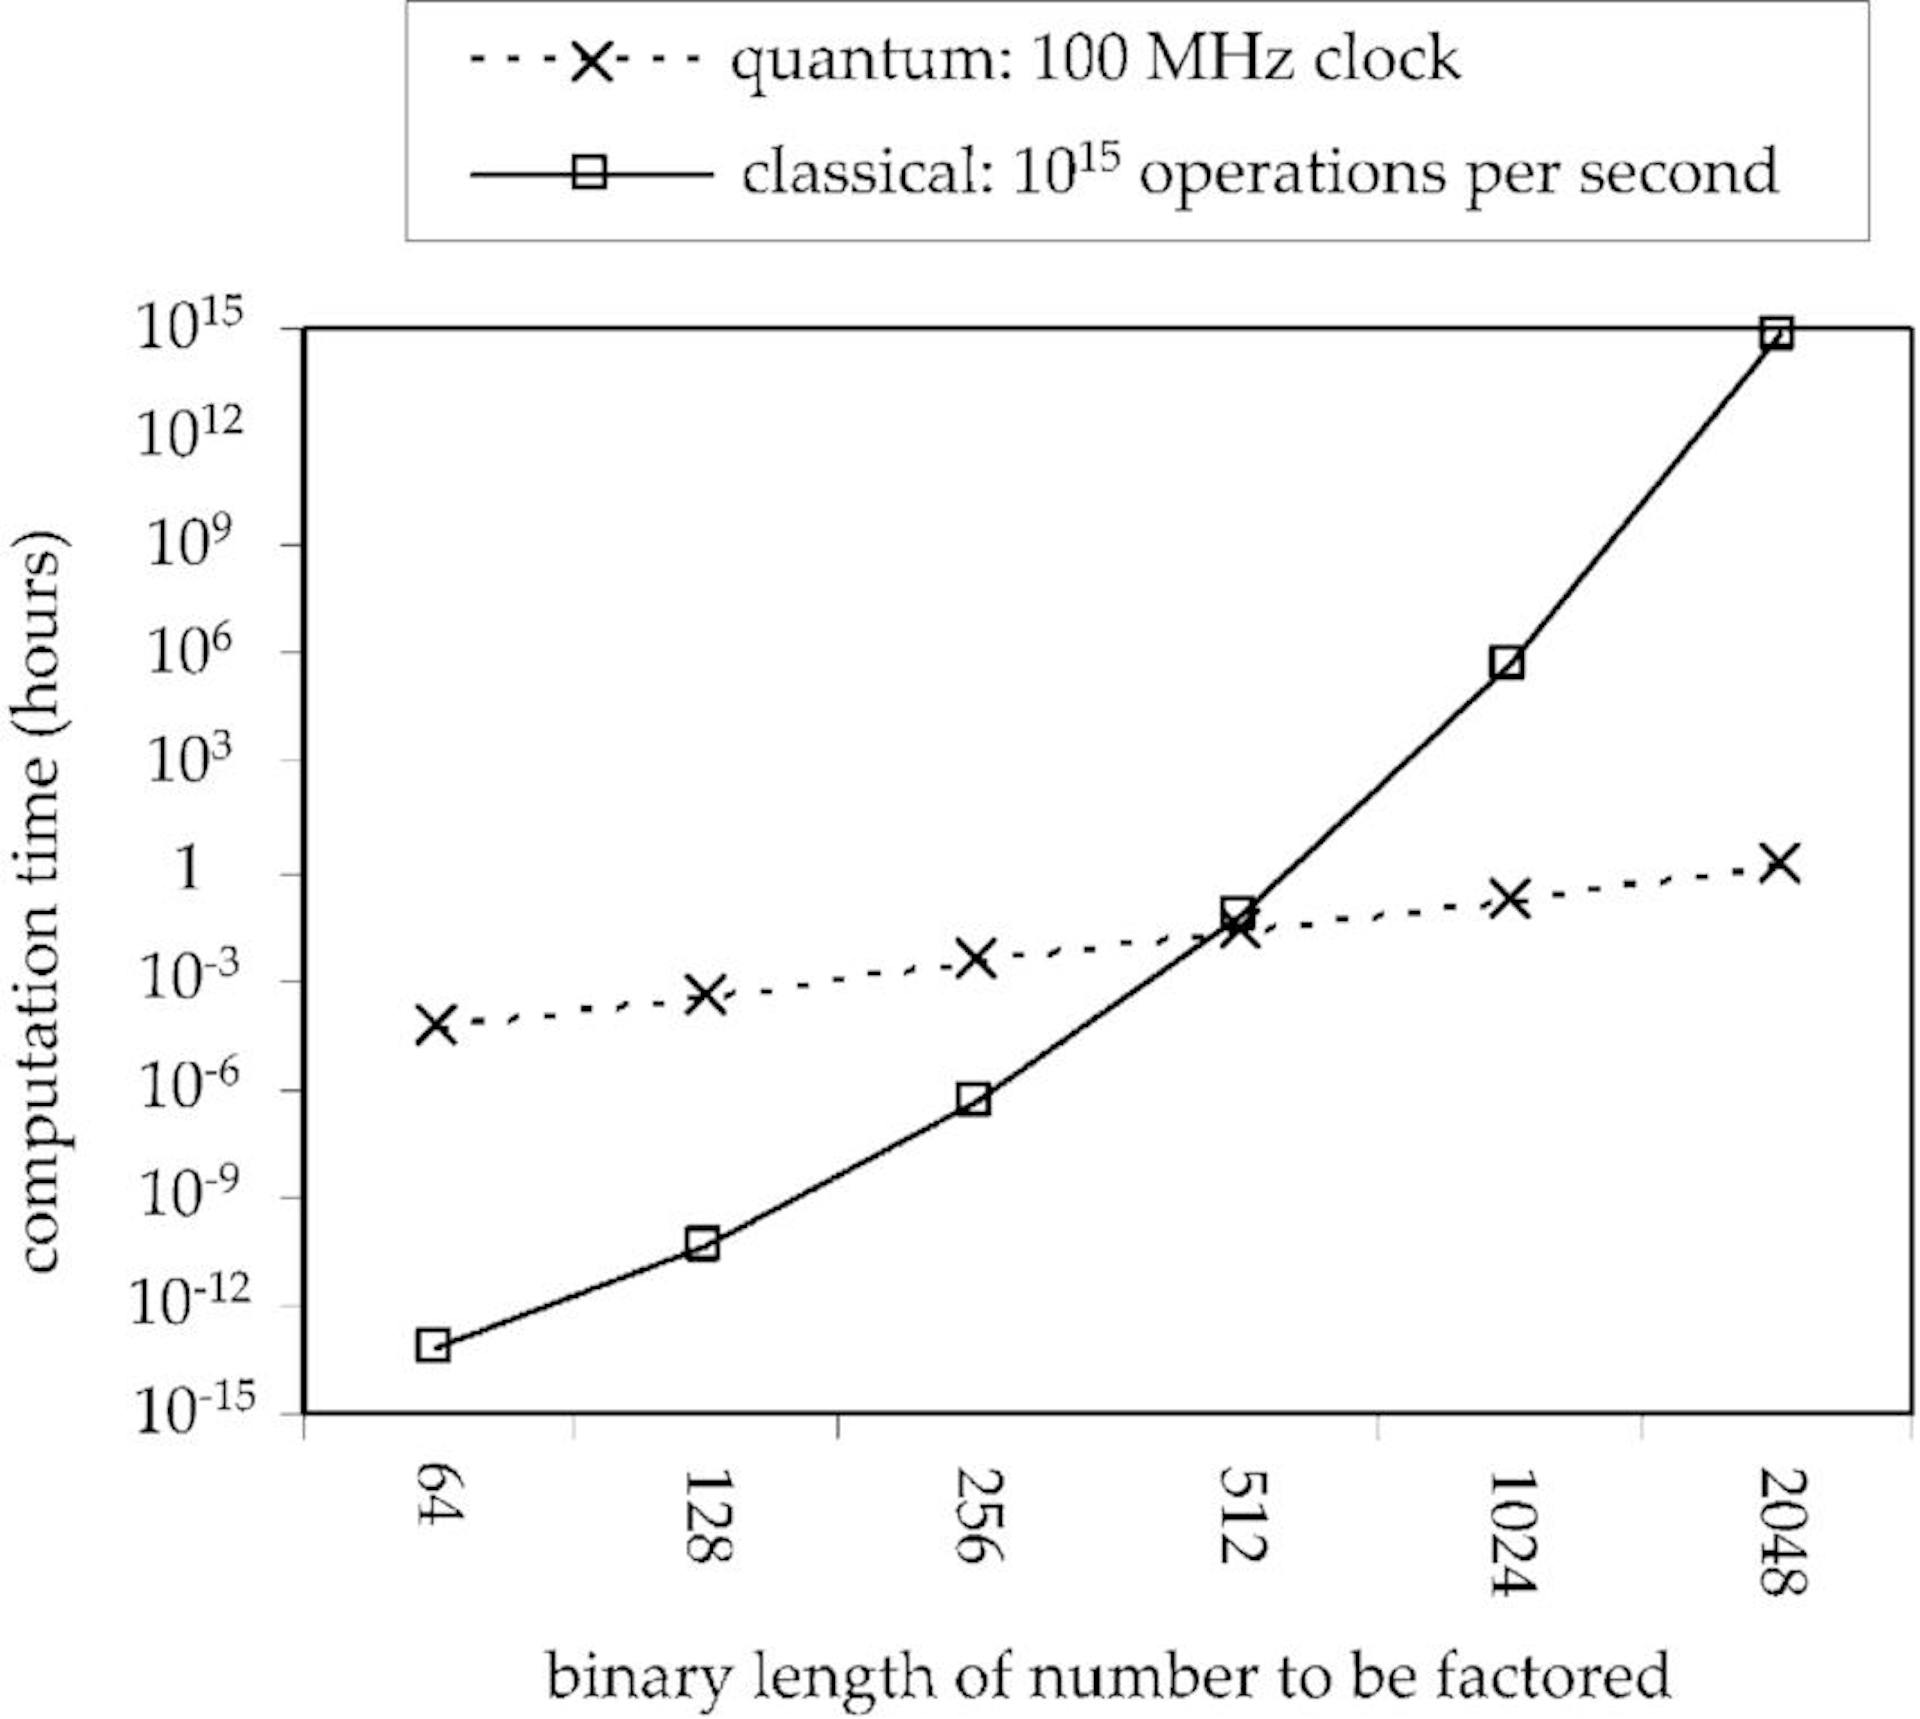 Fonte - https://www.researchgate.net/figure/Comparison-of-estimated-computation-time-in-hours-for-the-problem-of-factoring-numbers-of_fig1_2986358